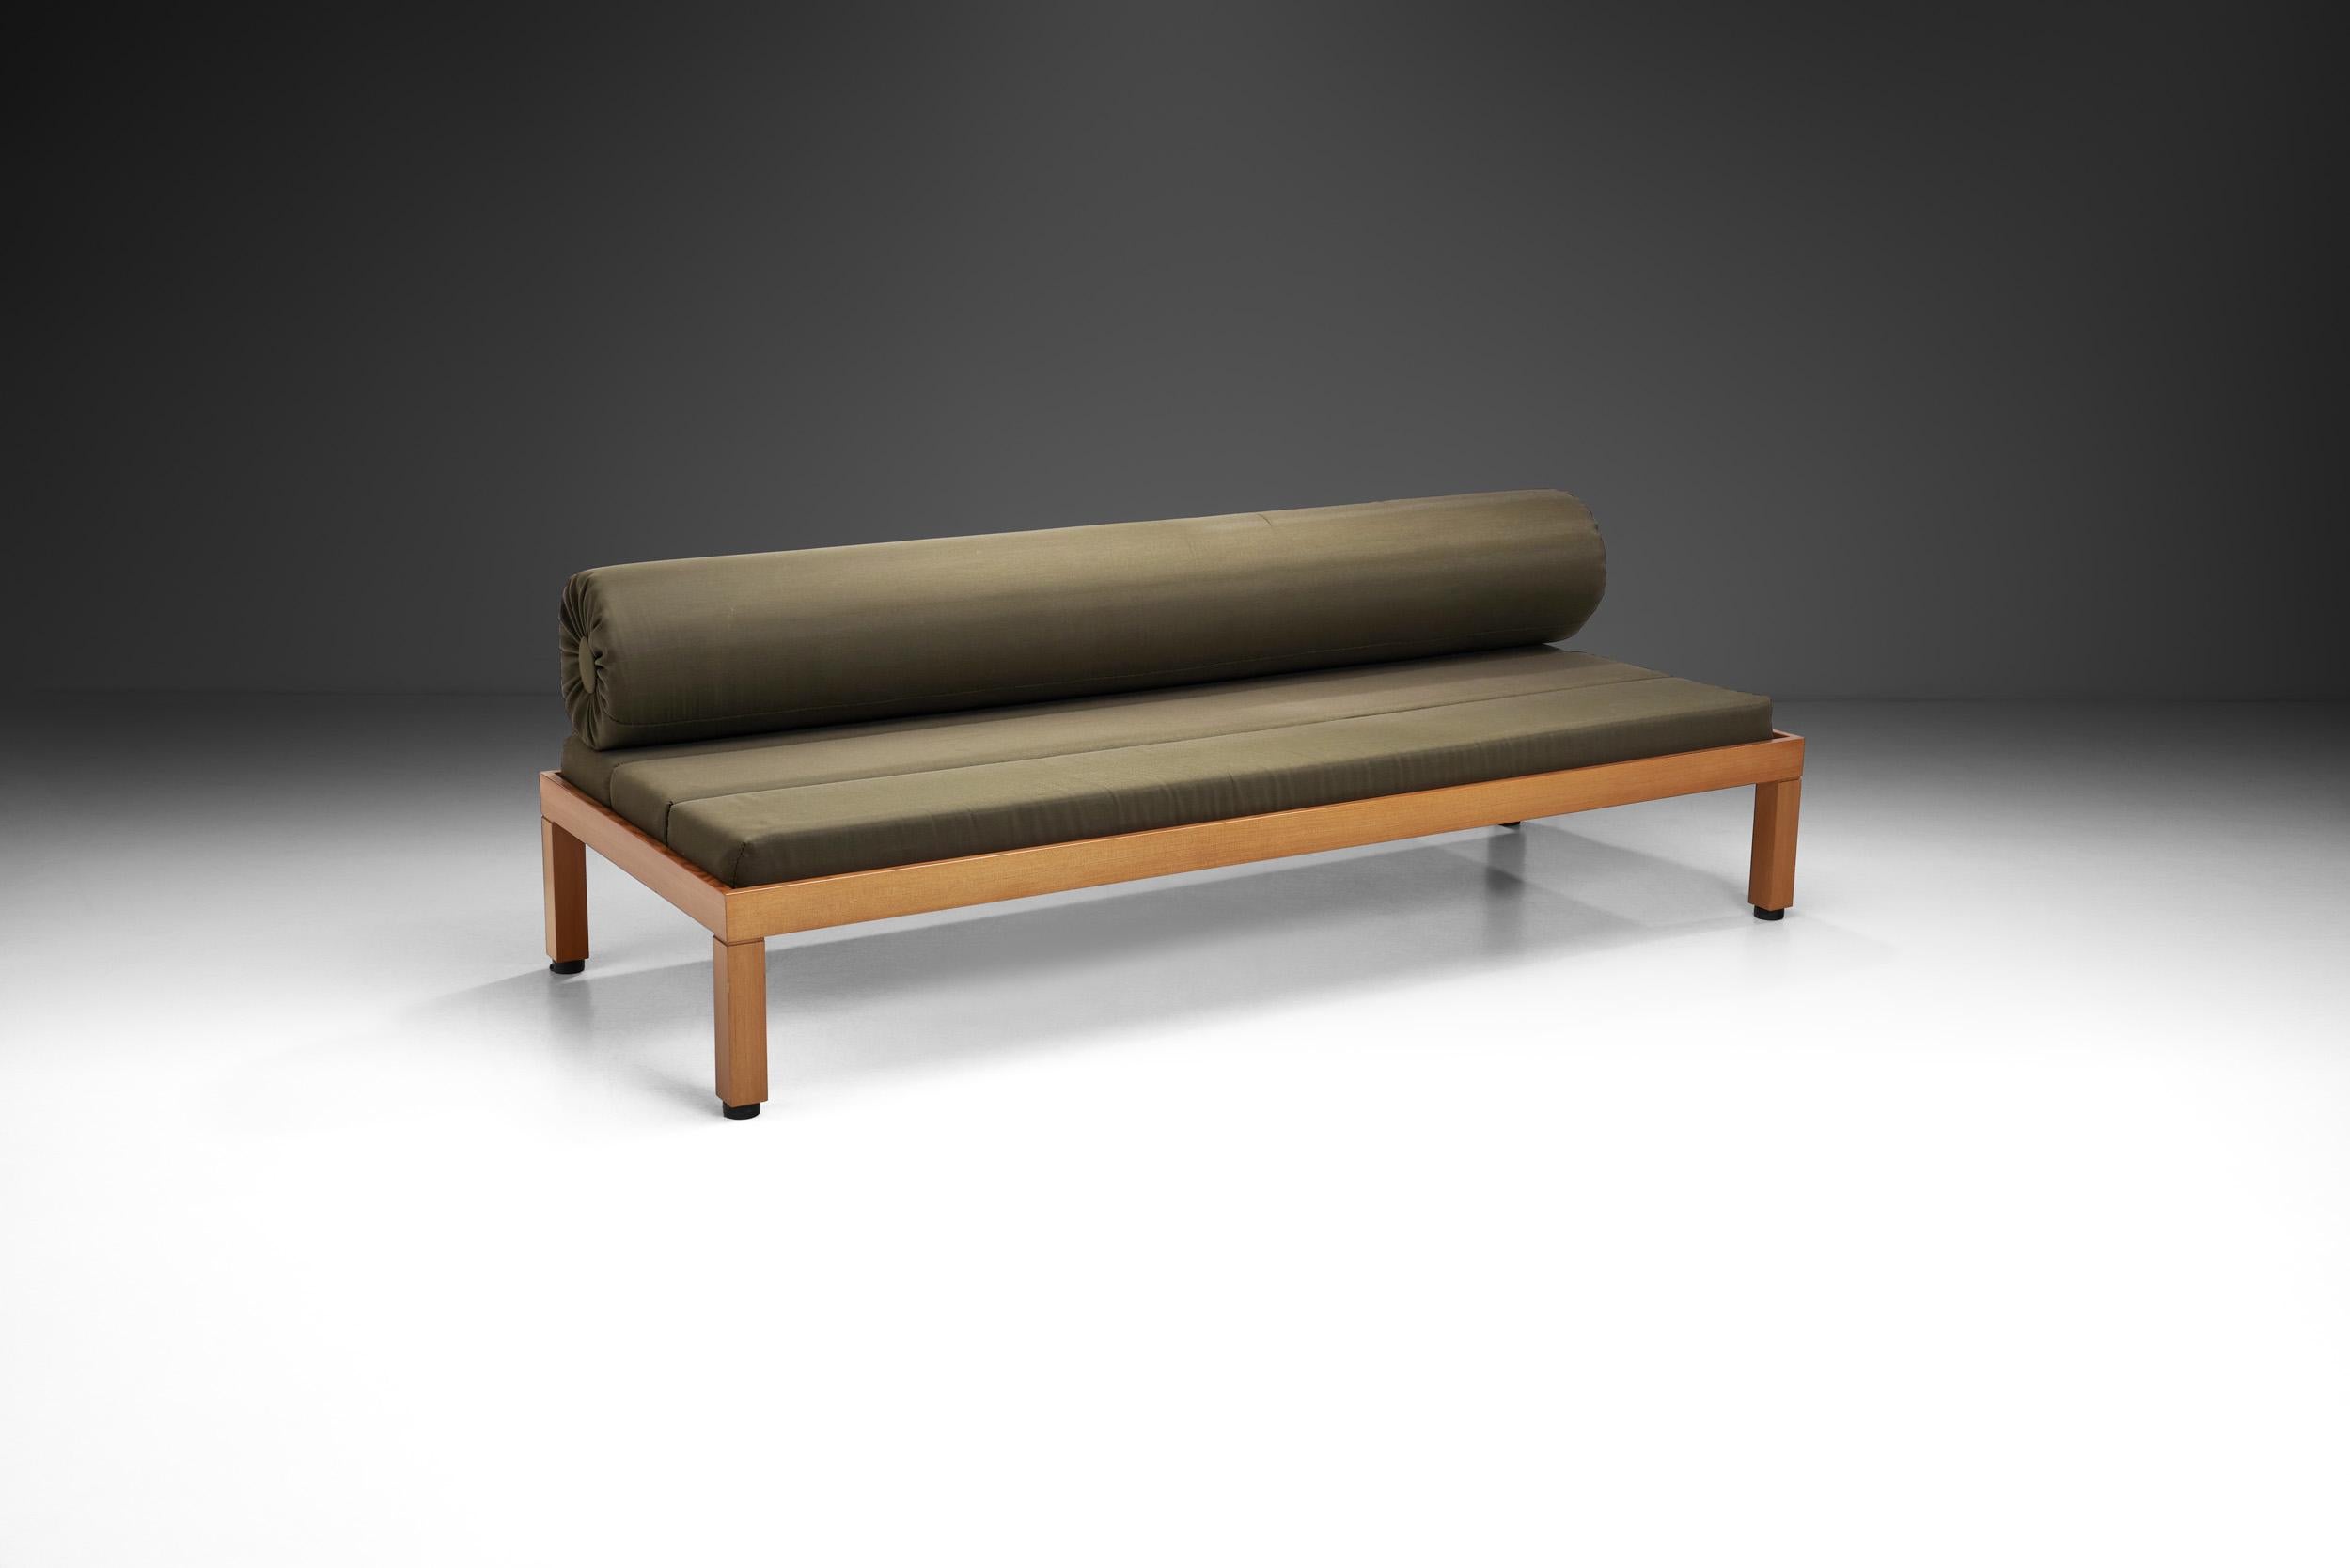 This daybed is a masterpiece of the artistic collaboration between architect Tauno Haroma, master builder Pentti Saarinen and architect Ilkka Salo. The design of this one-off, exquisite piece of furniture is a harmonious blend of architectural